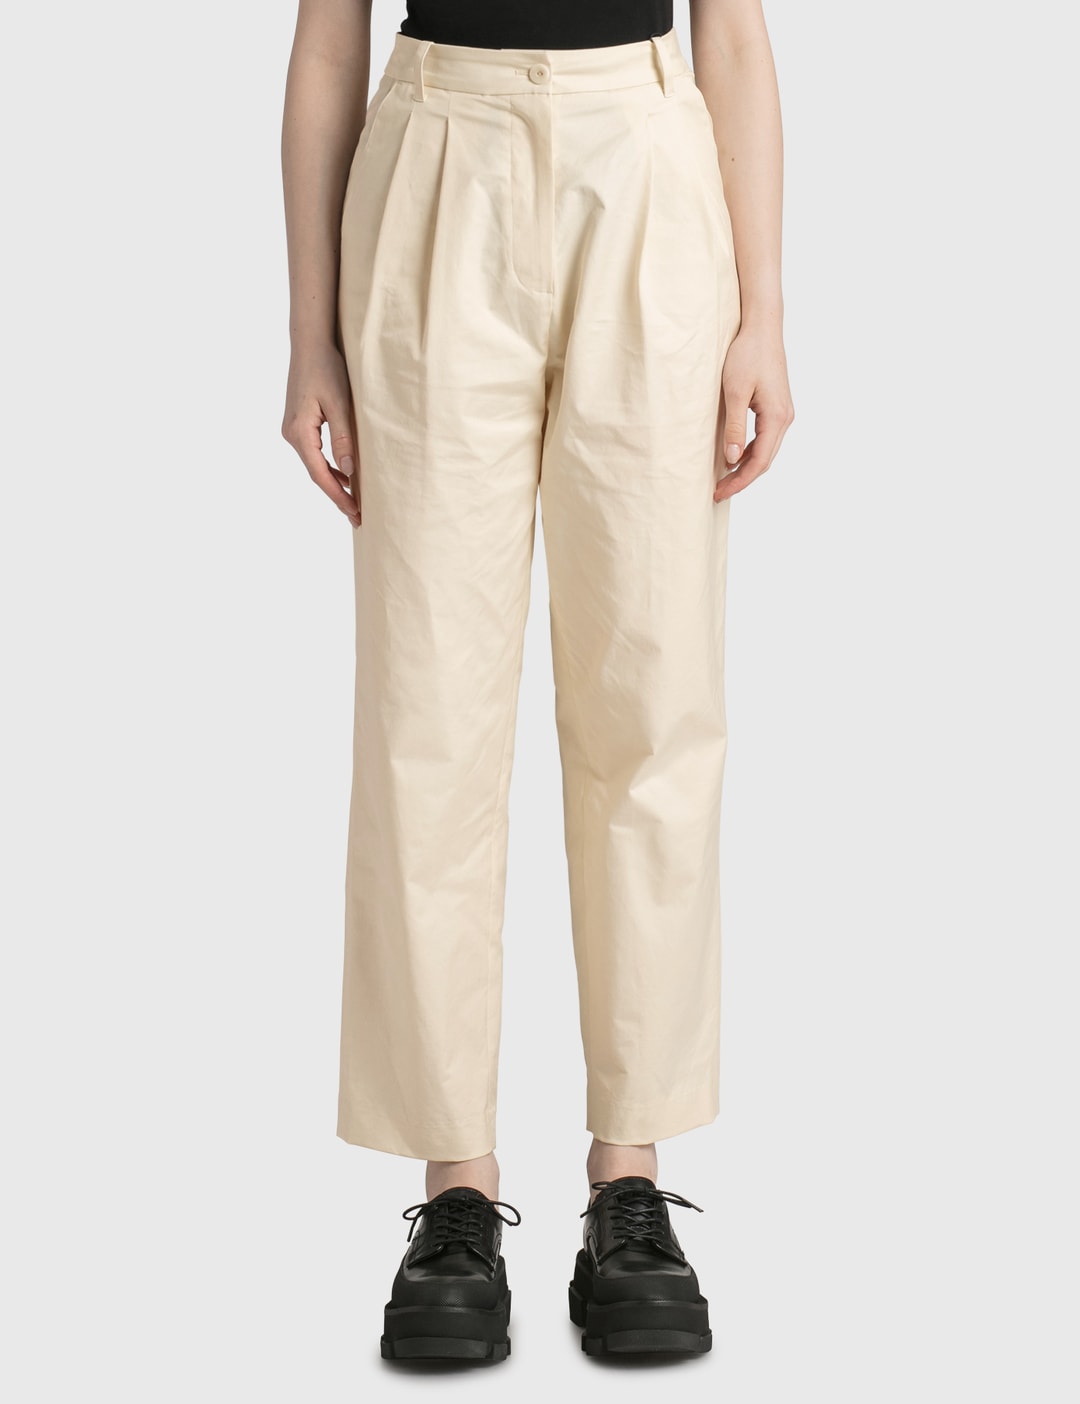 Nothing Written - Rustle Casual Trousers | HBX - Globally Curated ...